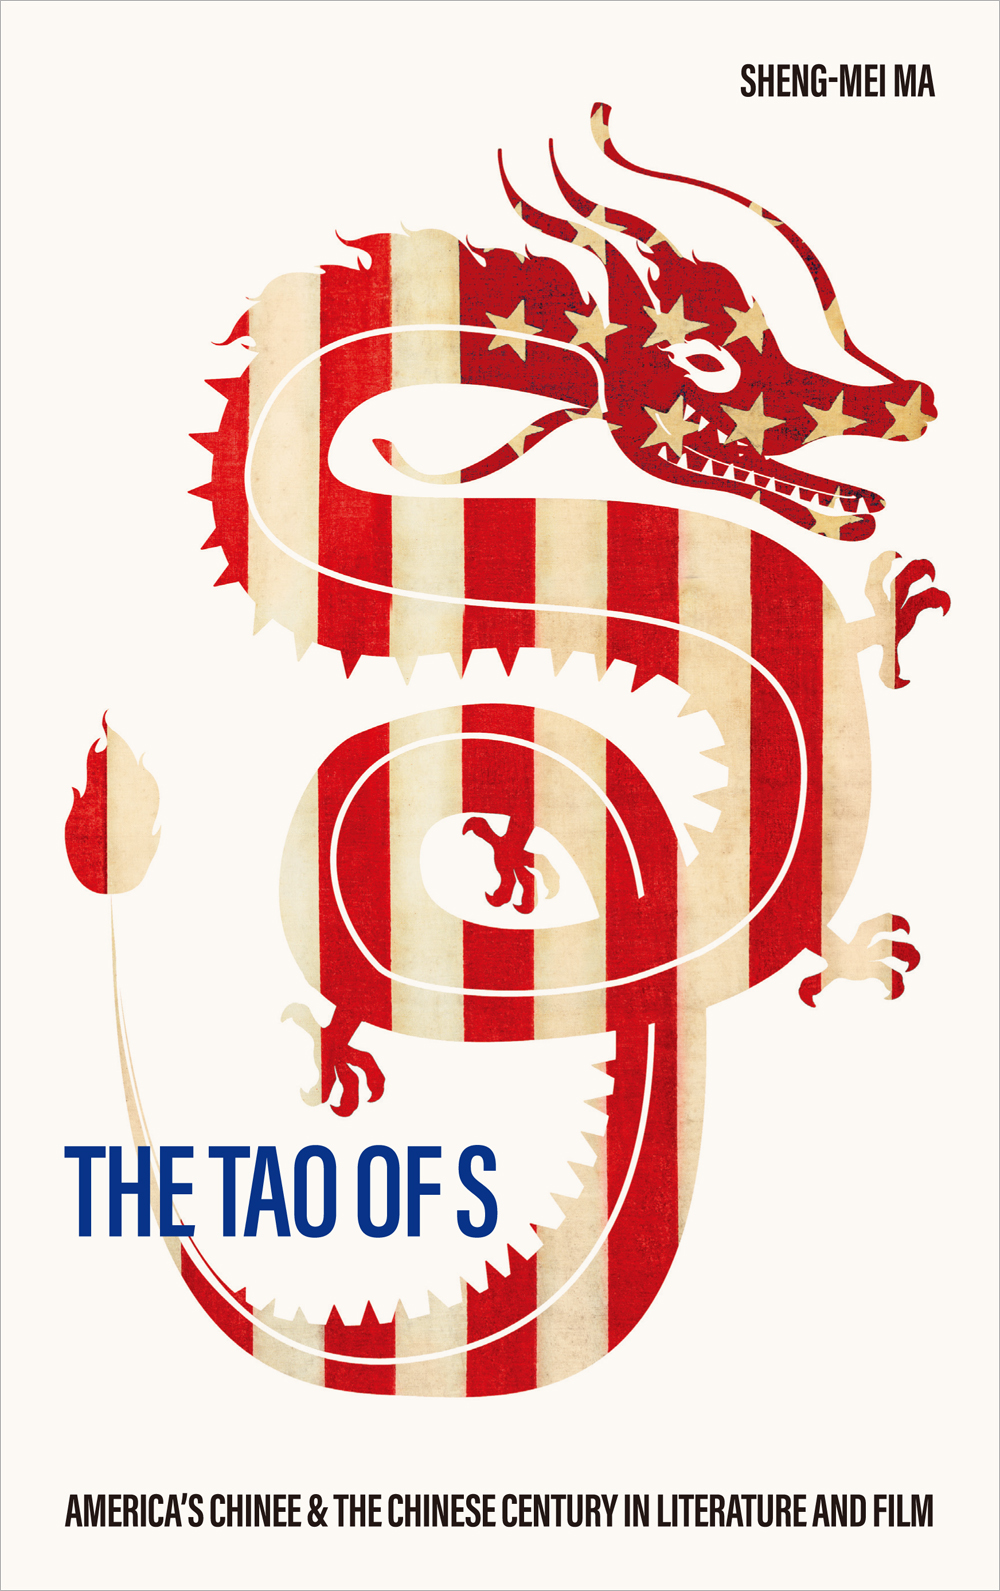 The Tao of S: America's Chinee & the Chinese Century in Literature and Film(中文書名：S之道──文學與電影中的華人)